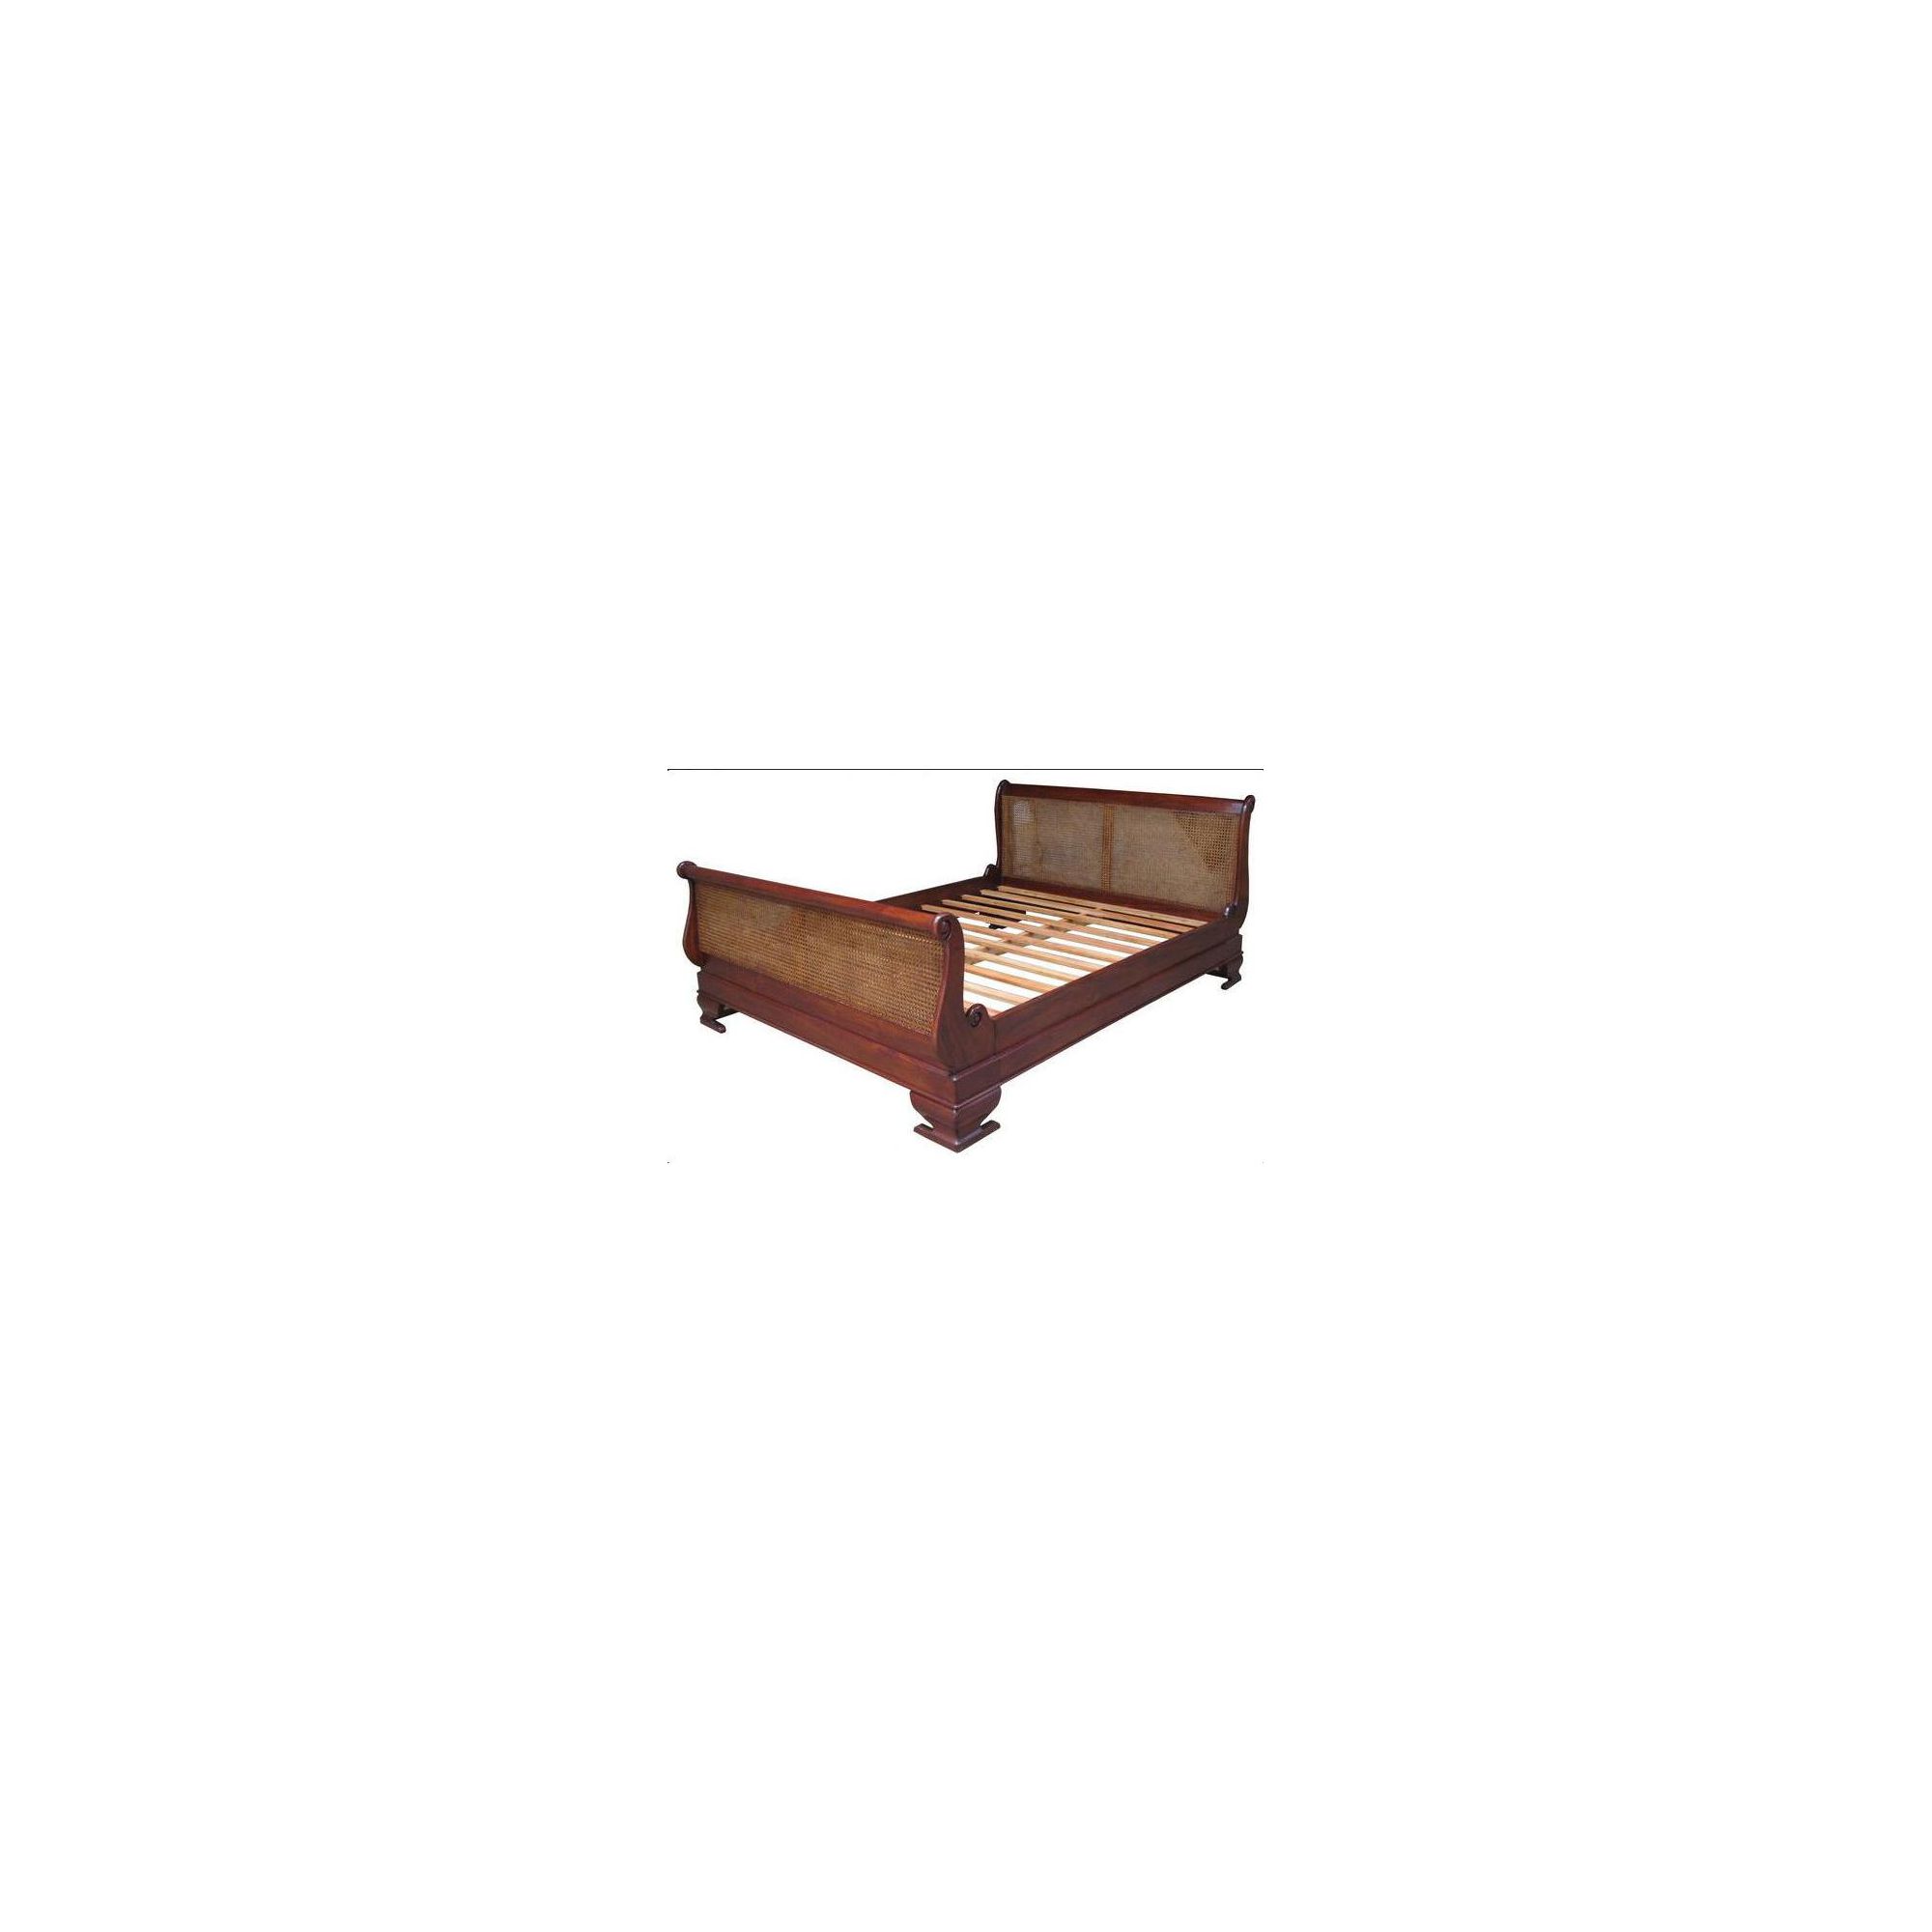 Lock stock and barrel Mahogany Rattan Sleigh Bed in Mahogany - Double - Antique White at Tesco Direct